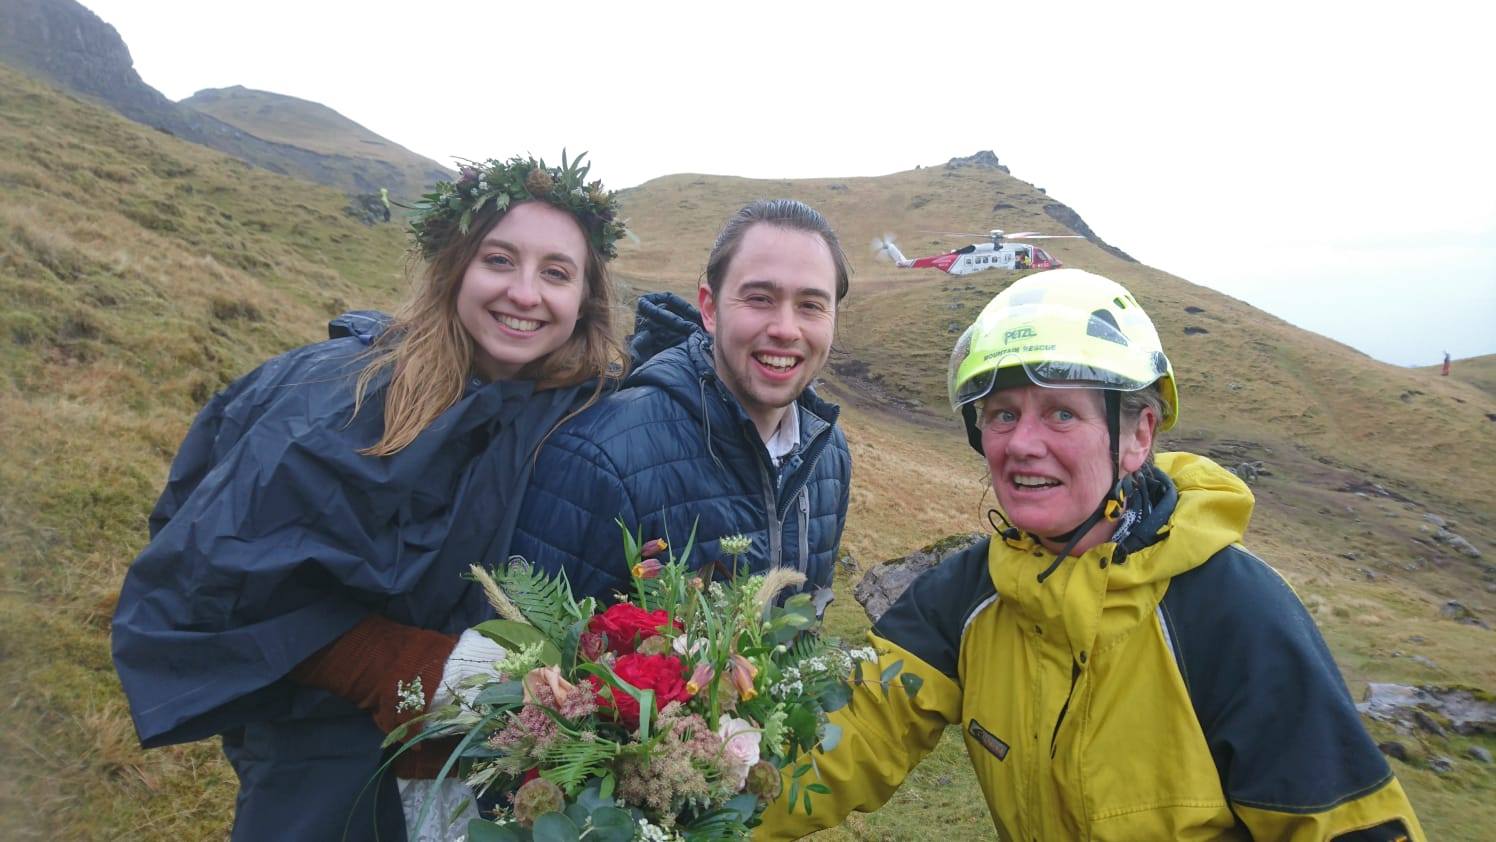 Skye Mountain Rescue Team member Helen Urquhart stops for a moment to have her photo taken with a newly married couple.